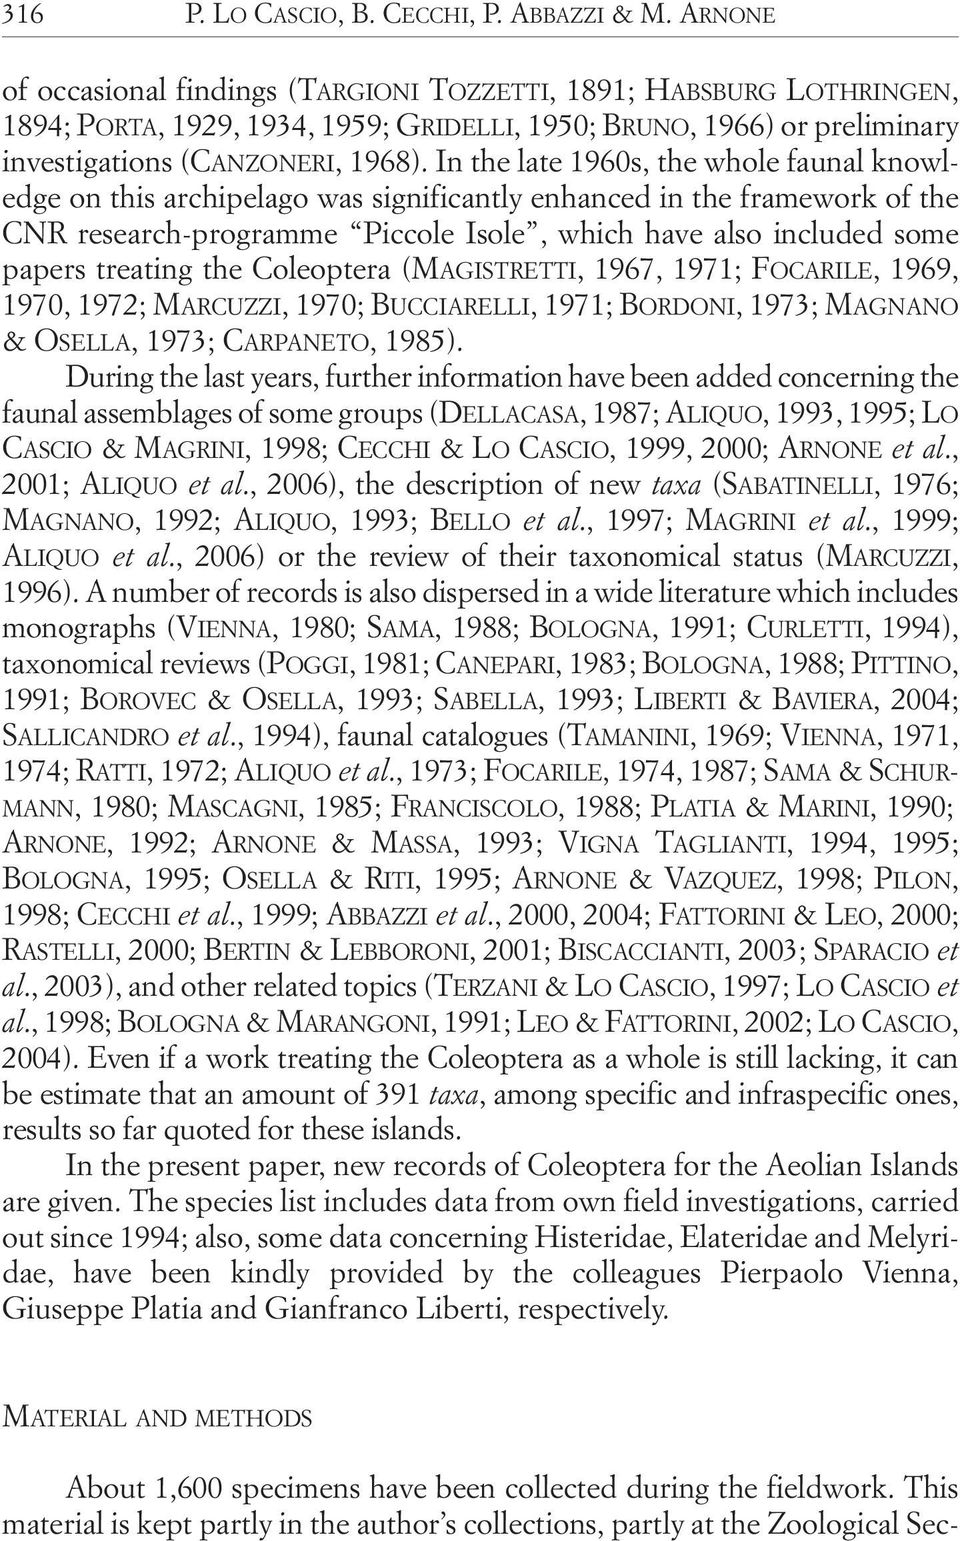 In the late 1960s, the whole faunal knowledge on this archipelago was significantly enhanced in the framework of the CNR research-programme Piccole Isole, which have also included some papers